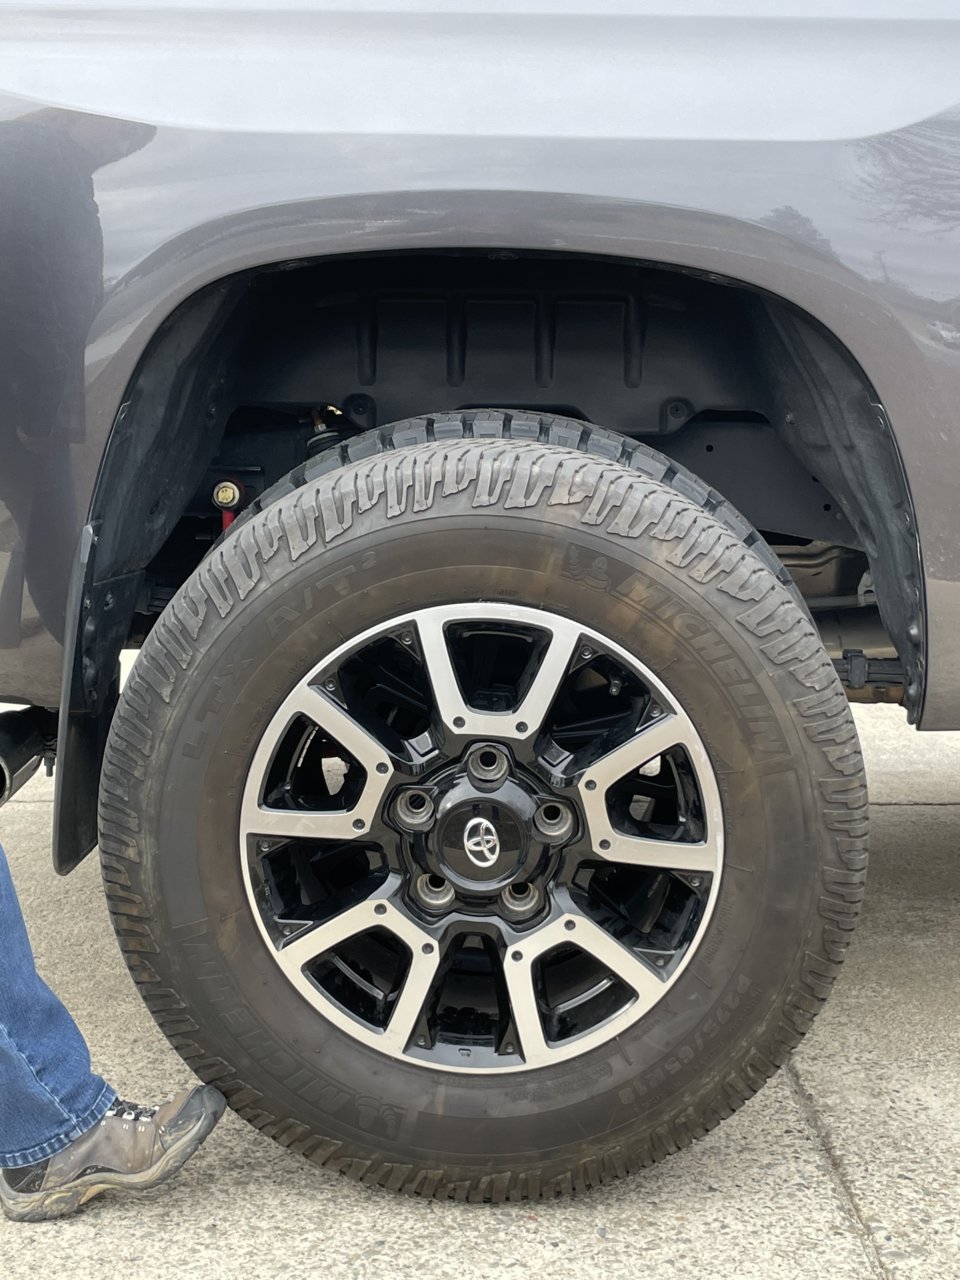 Who DID have issues with 285/70 on stock Pro? | Toyota Tundra Forum